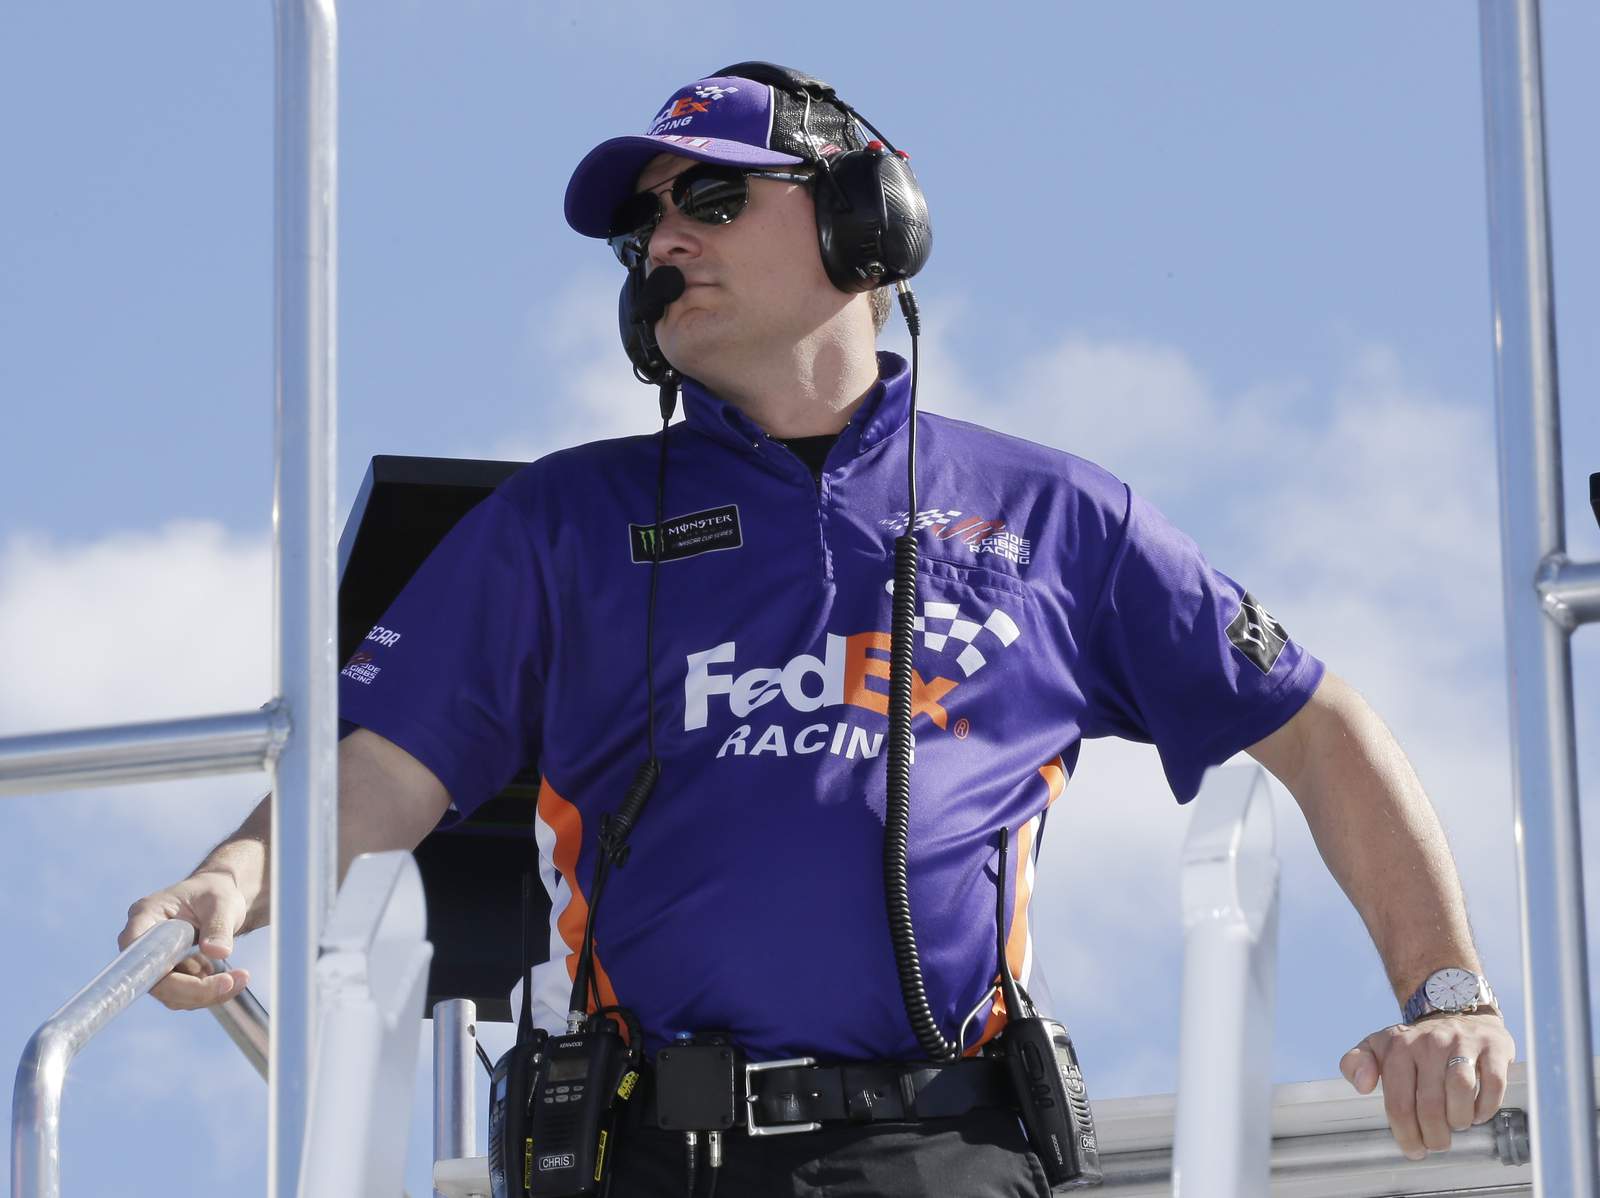 Crew chiefs feel the heat to be perfect in NASCAR finale